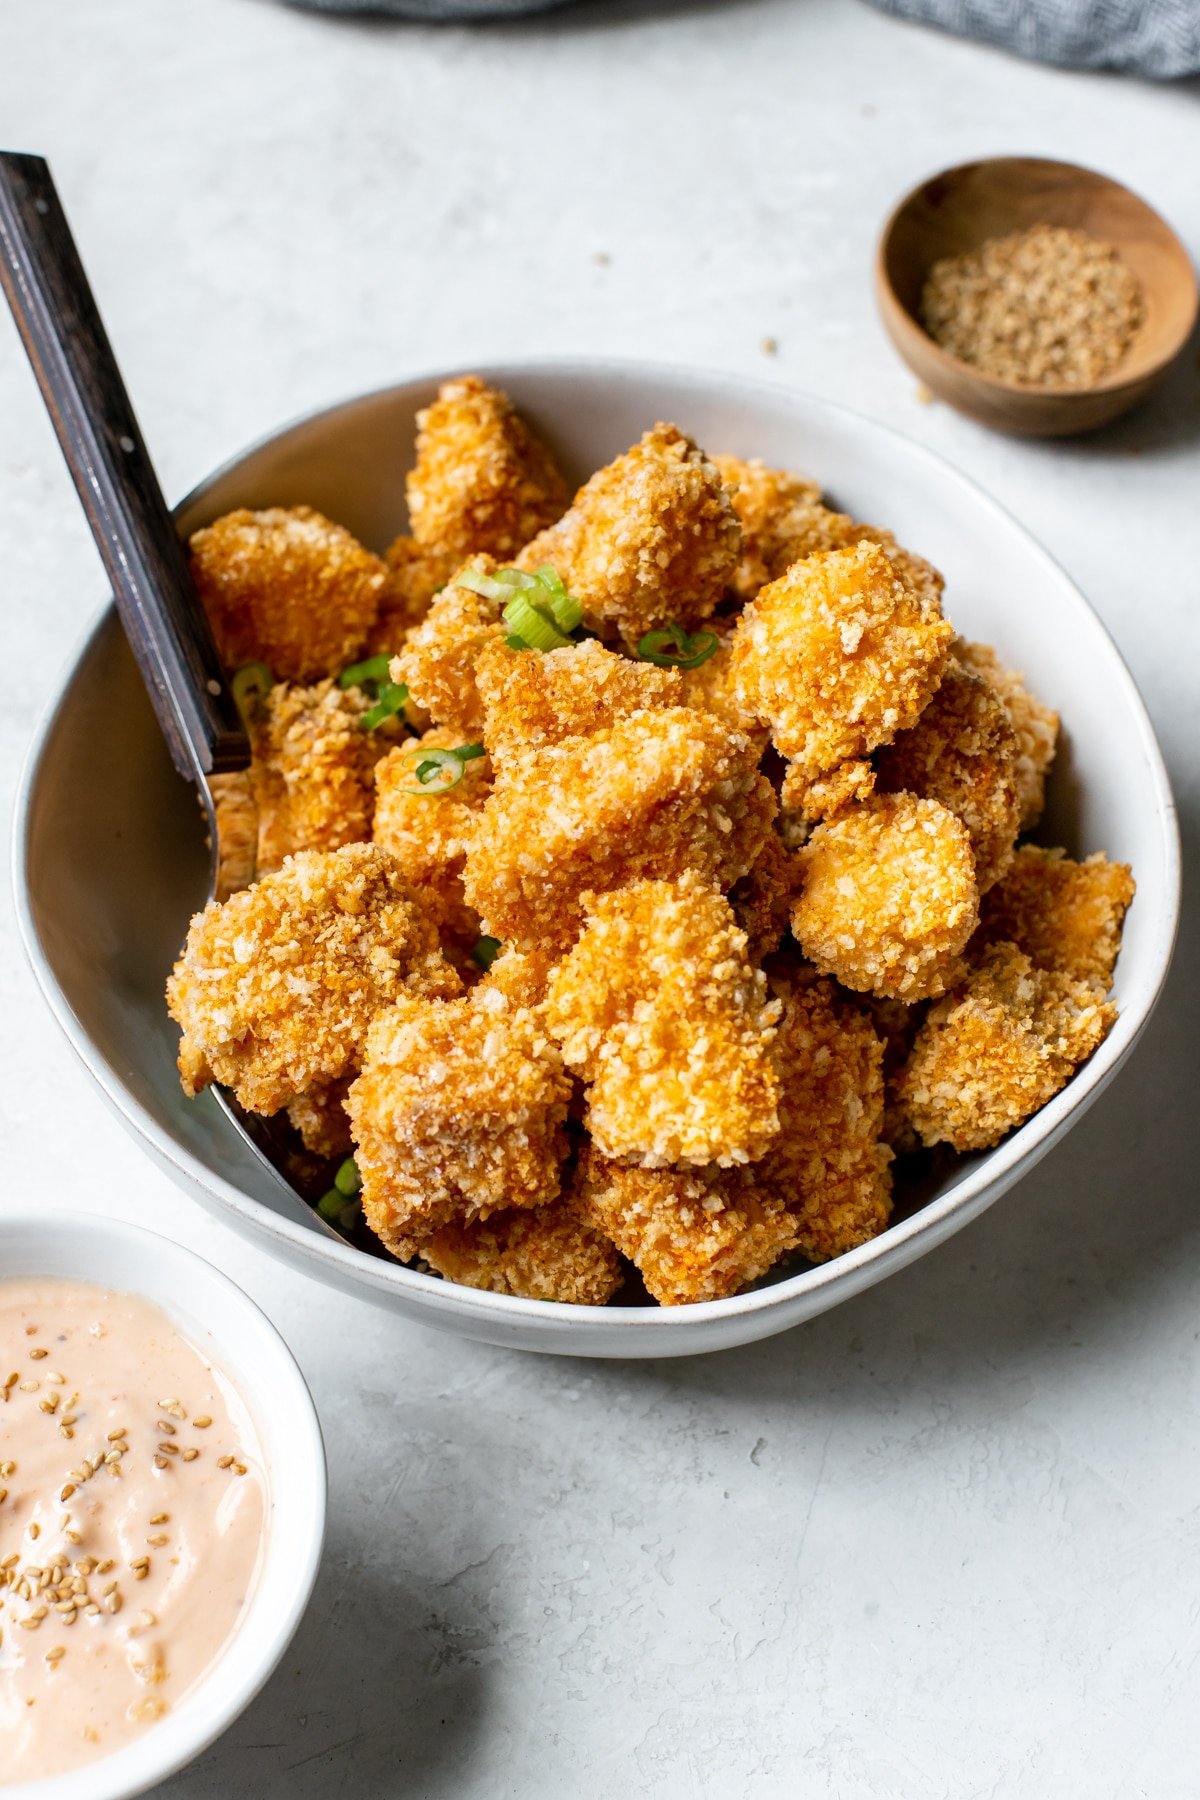 salmon coated in toasted Panko breadcrumbs in a white bowl